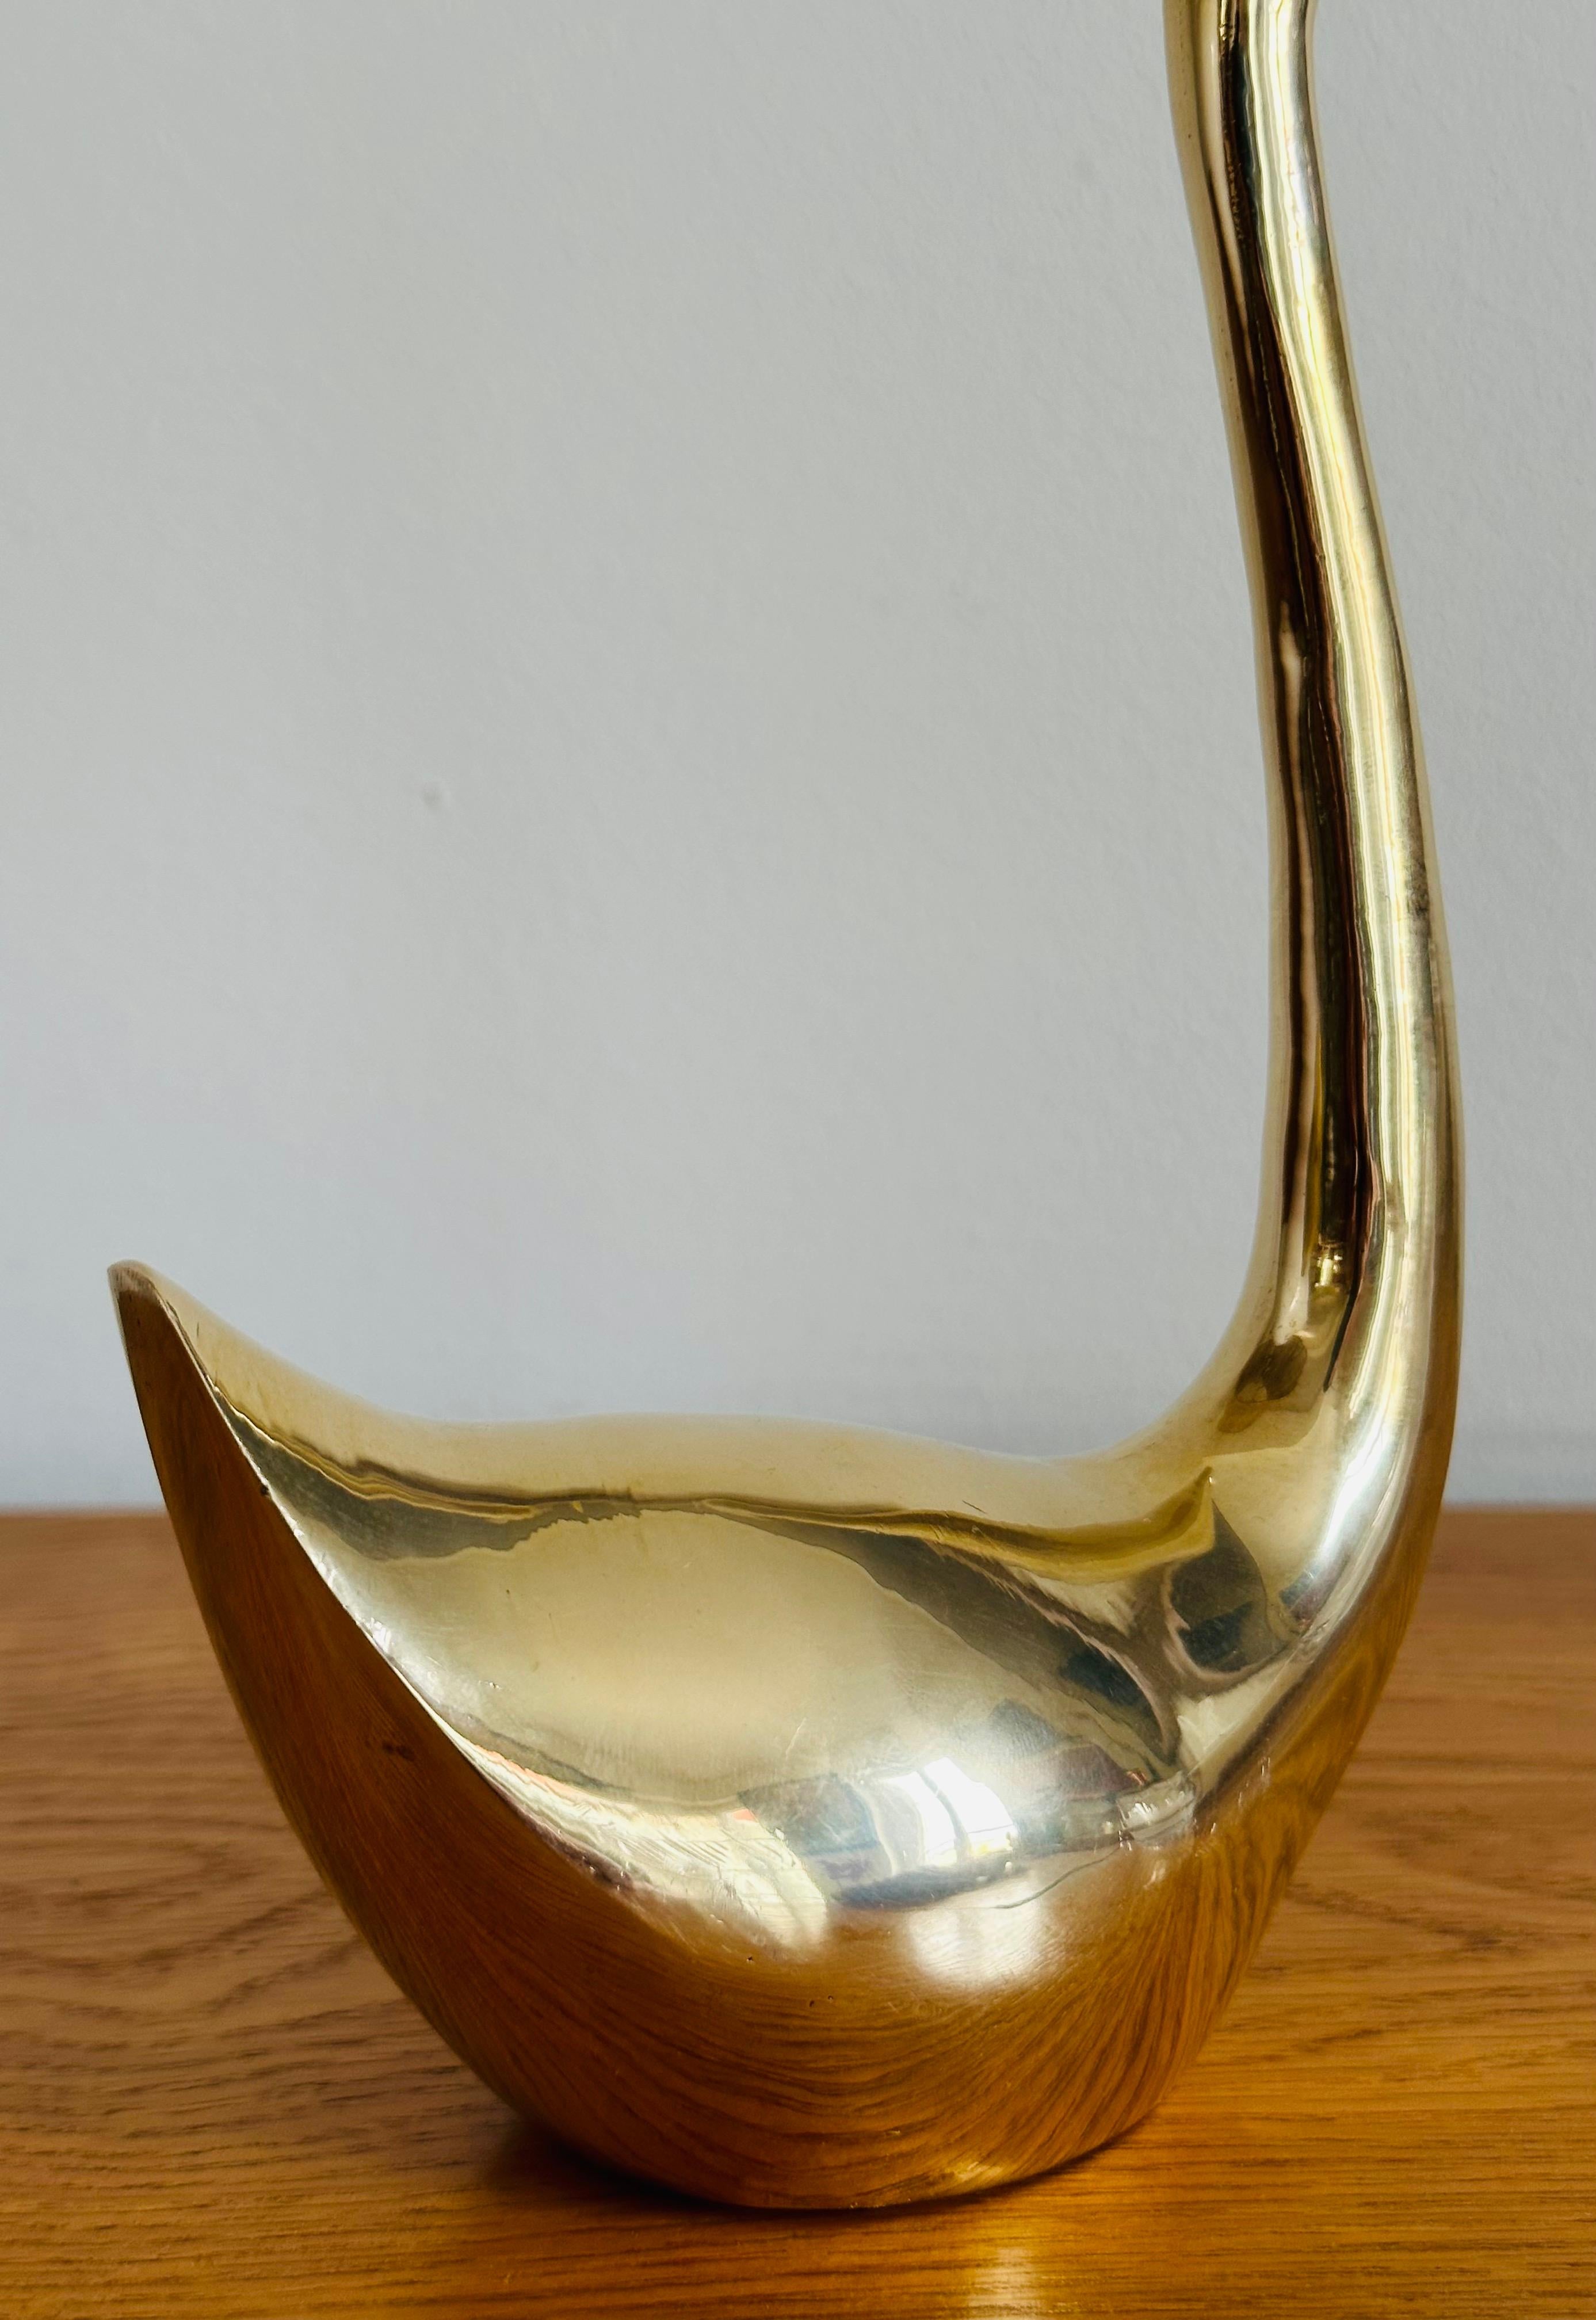 Vintage 1970s French Polished Brass Elegant Decorative Swan Paperweight 8